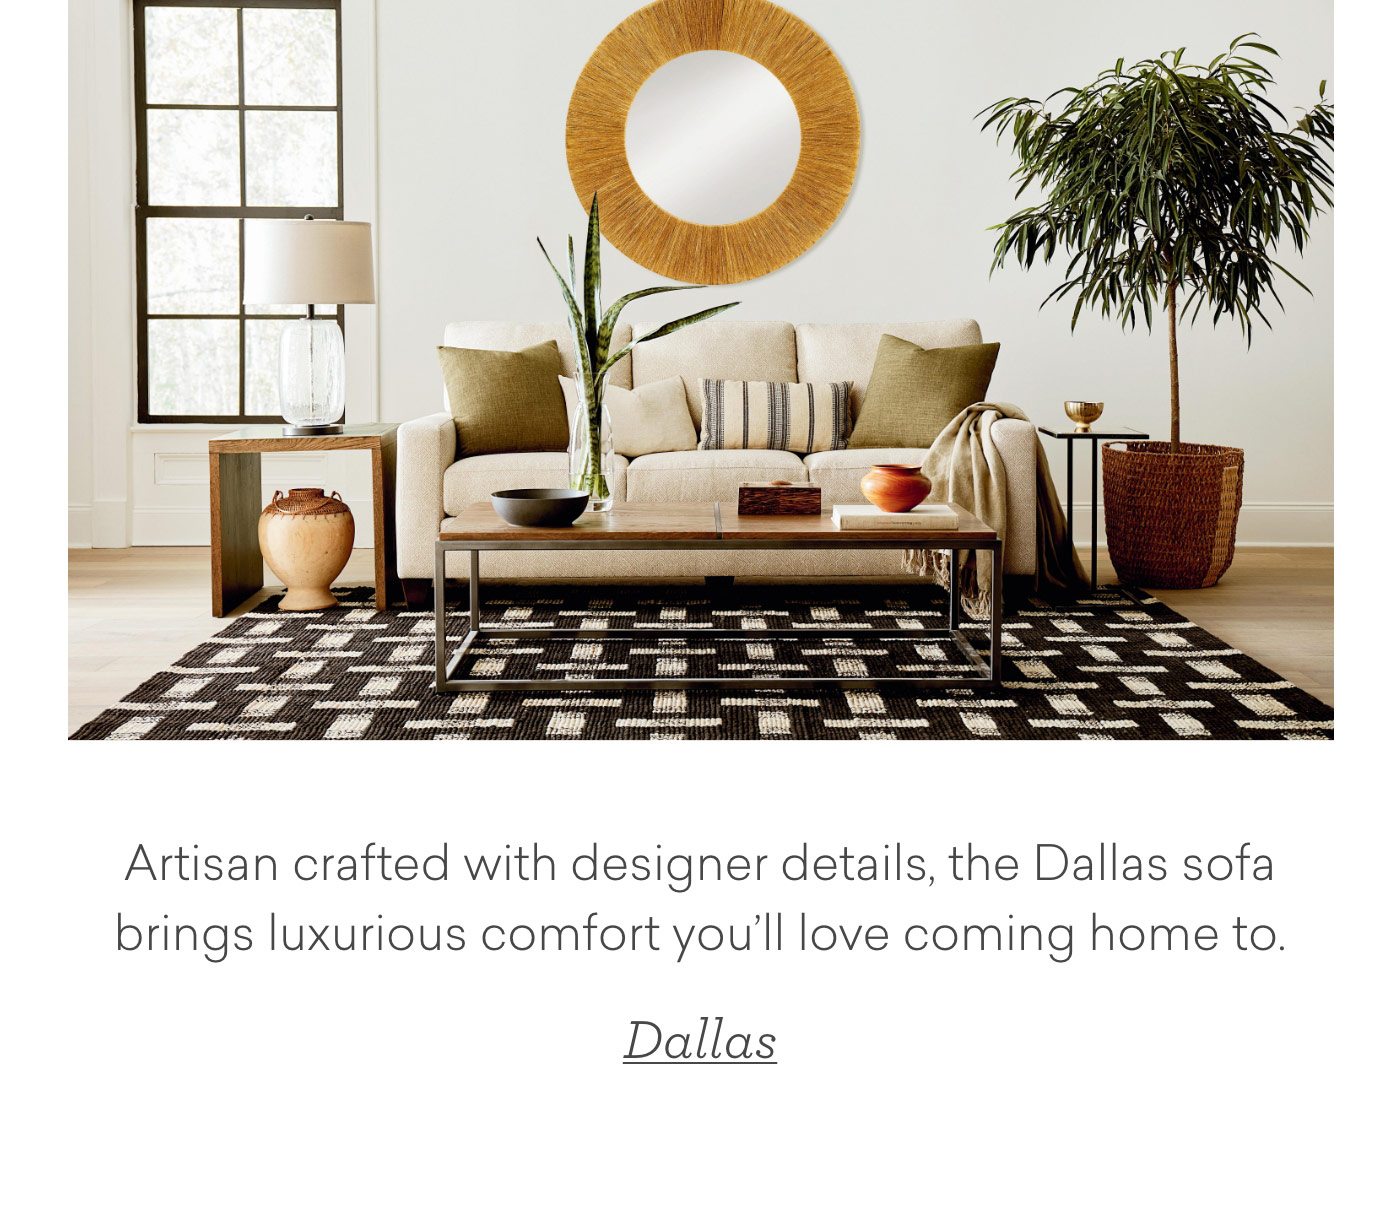 Artisan crafted with designer details, the Dallas sofa brings luxurious comfort you'll love coming home to. Shop Dallas Sofa.